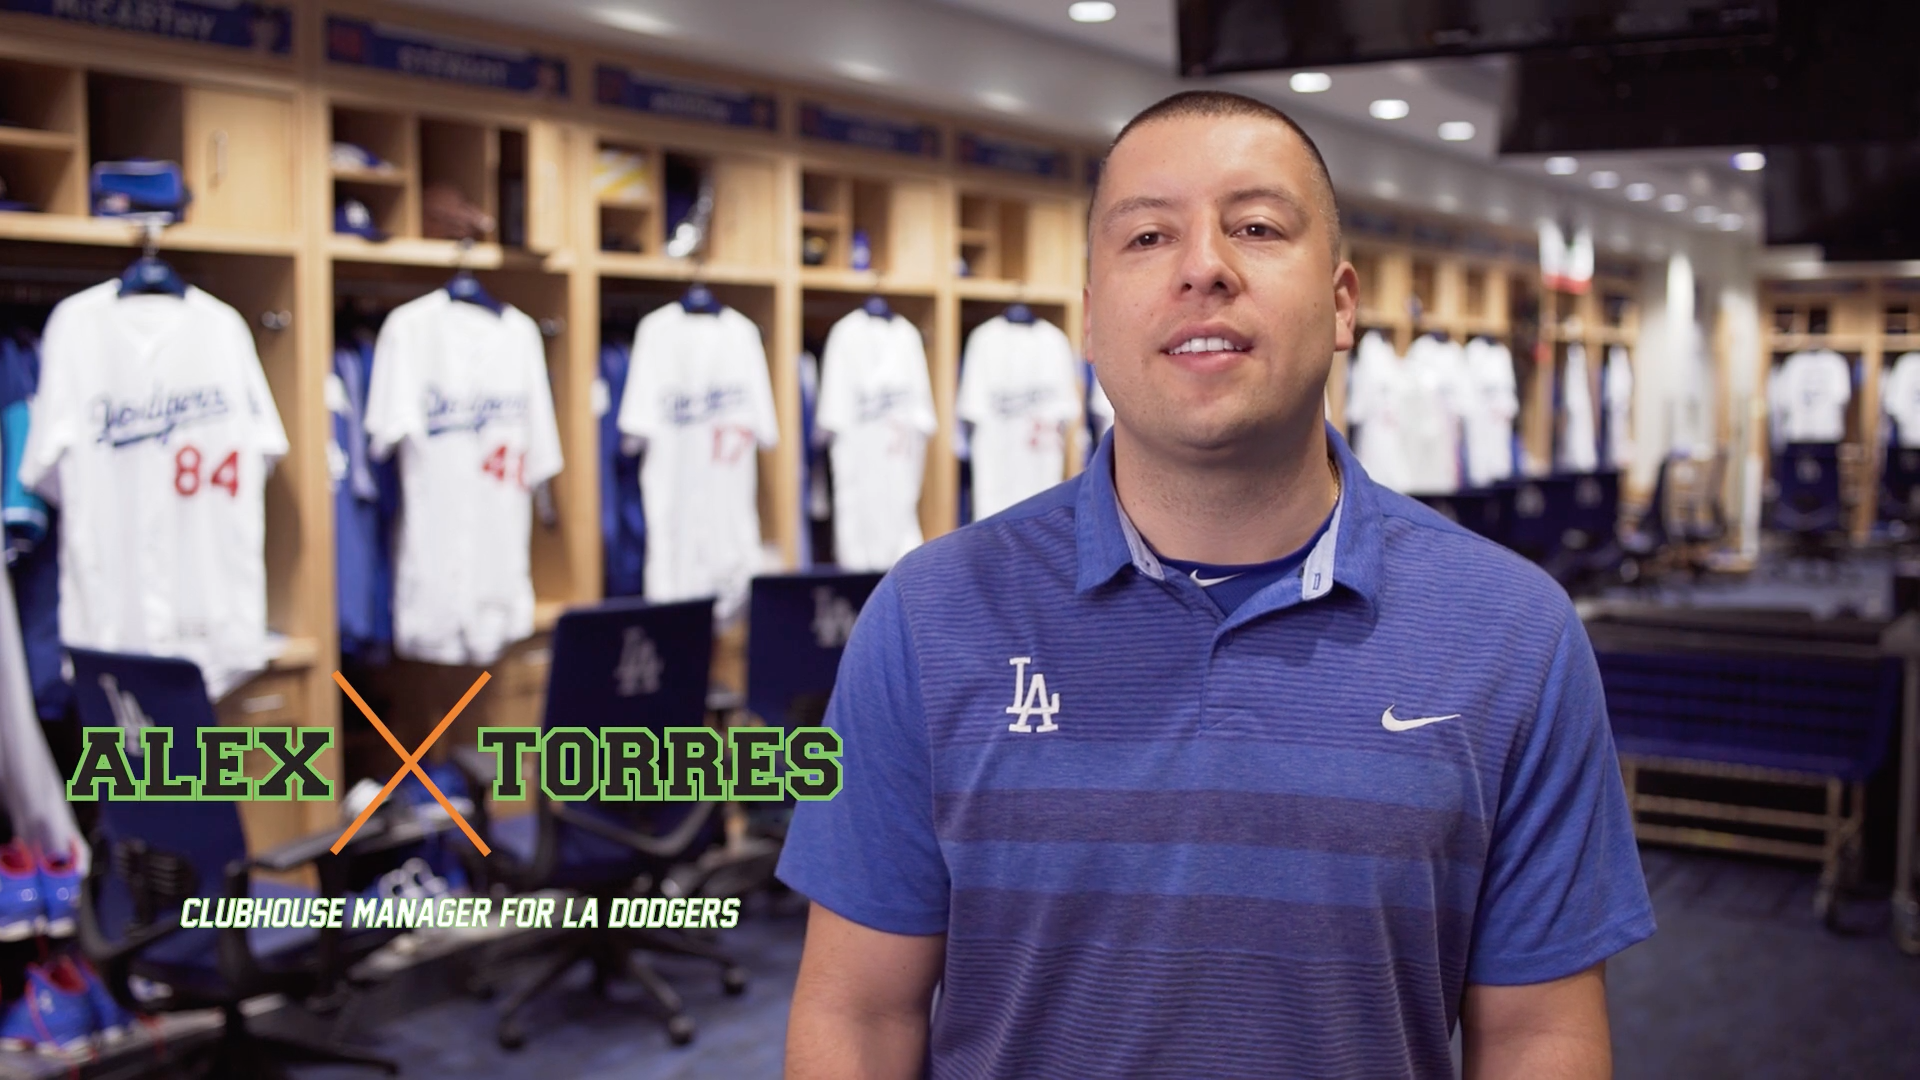 An On Camera Interview featuring Alex Torres, Clubhouse Manager for LA Dodgers